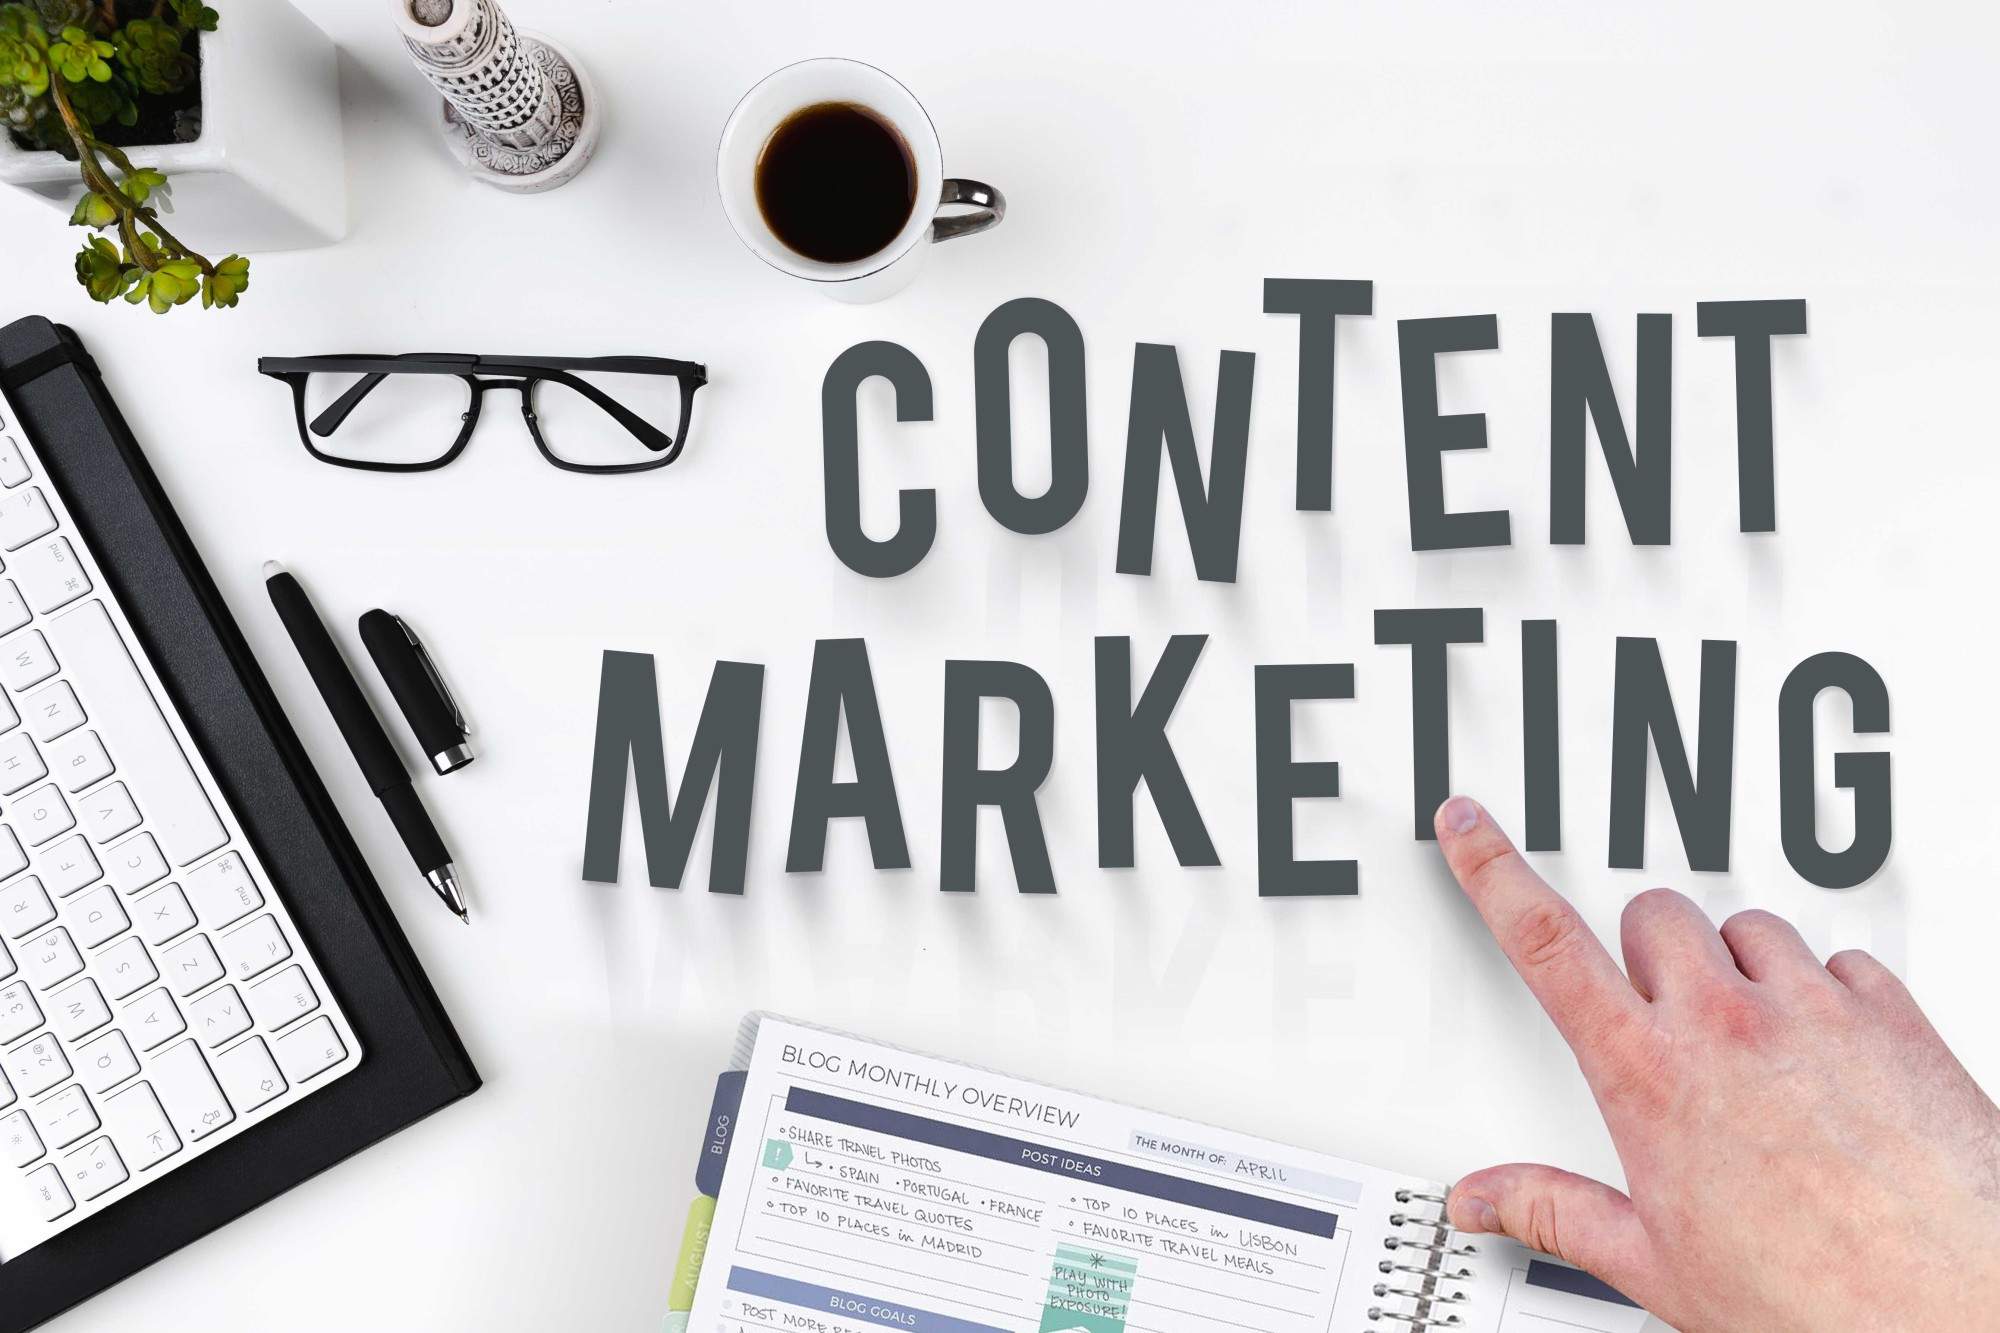 Why Use Content Marketing? What Are the Benefits?